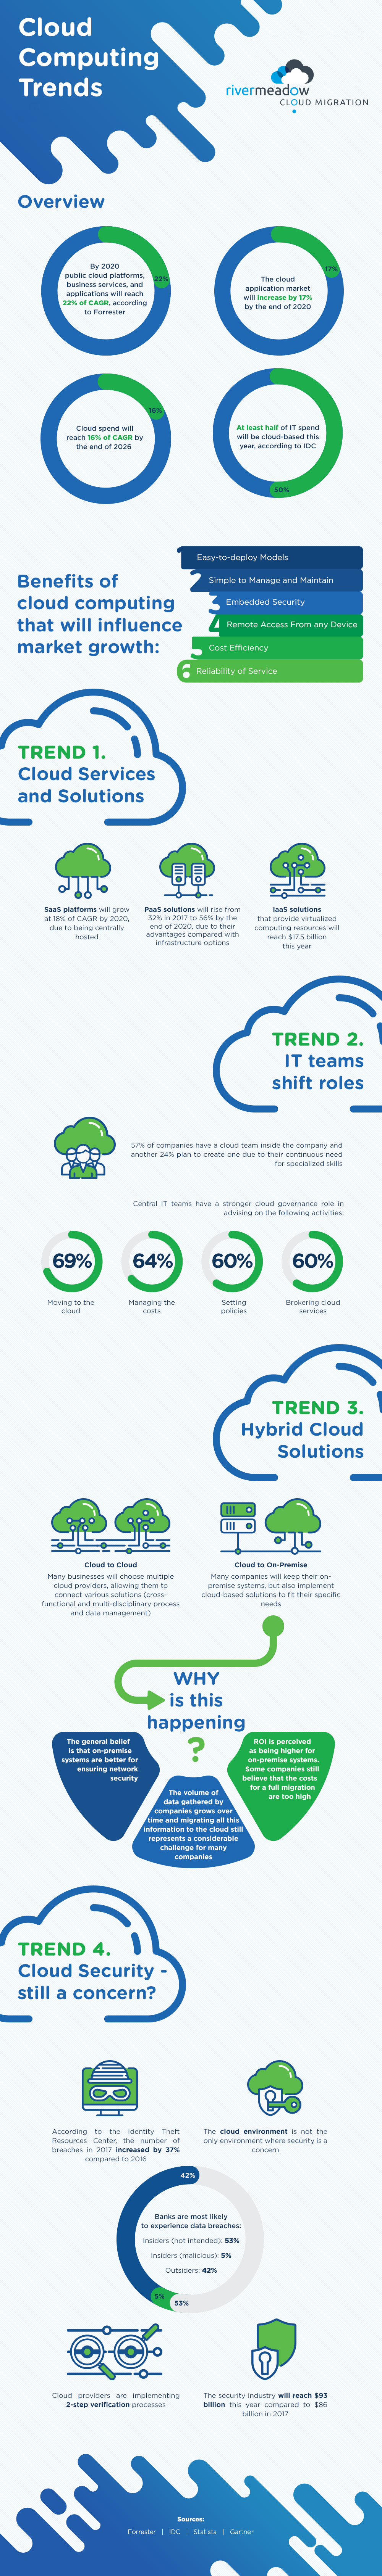 Cloud Computing Trends infographic